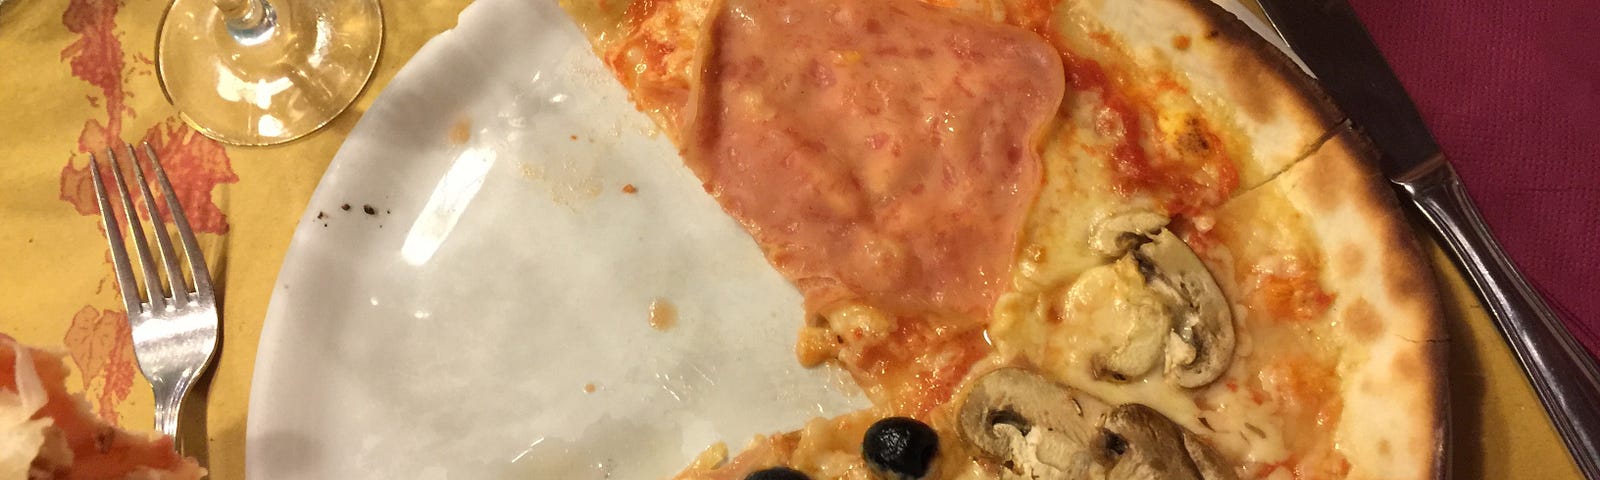 Part of an Italian Gluten-Free pizza photographed from above.